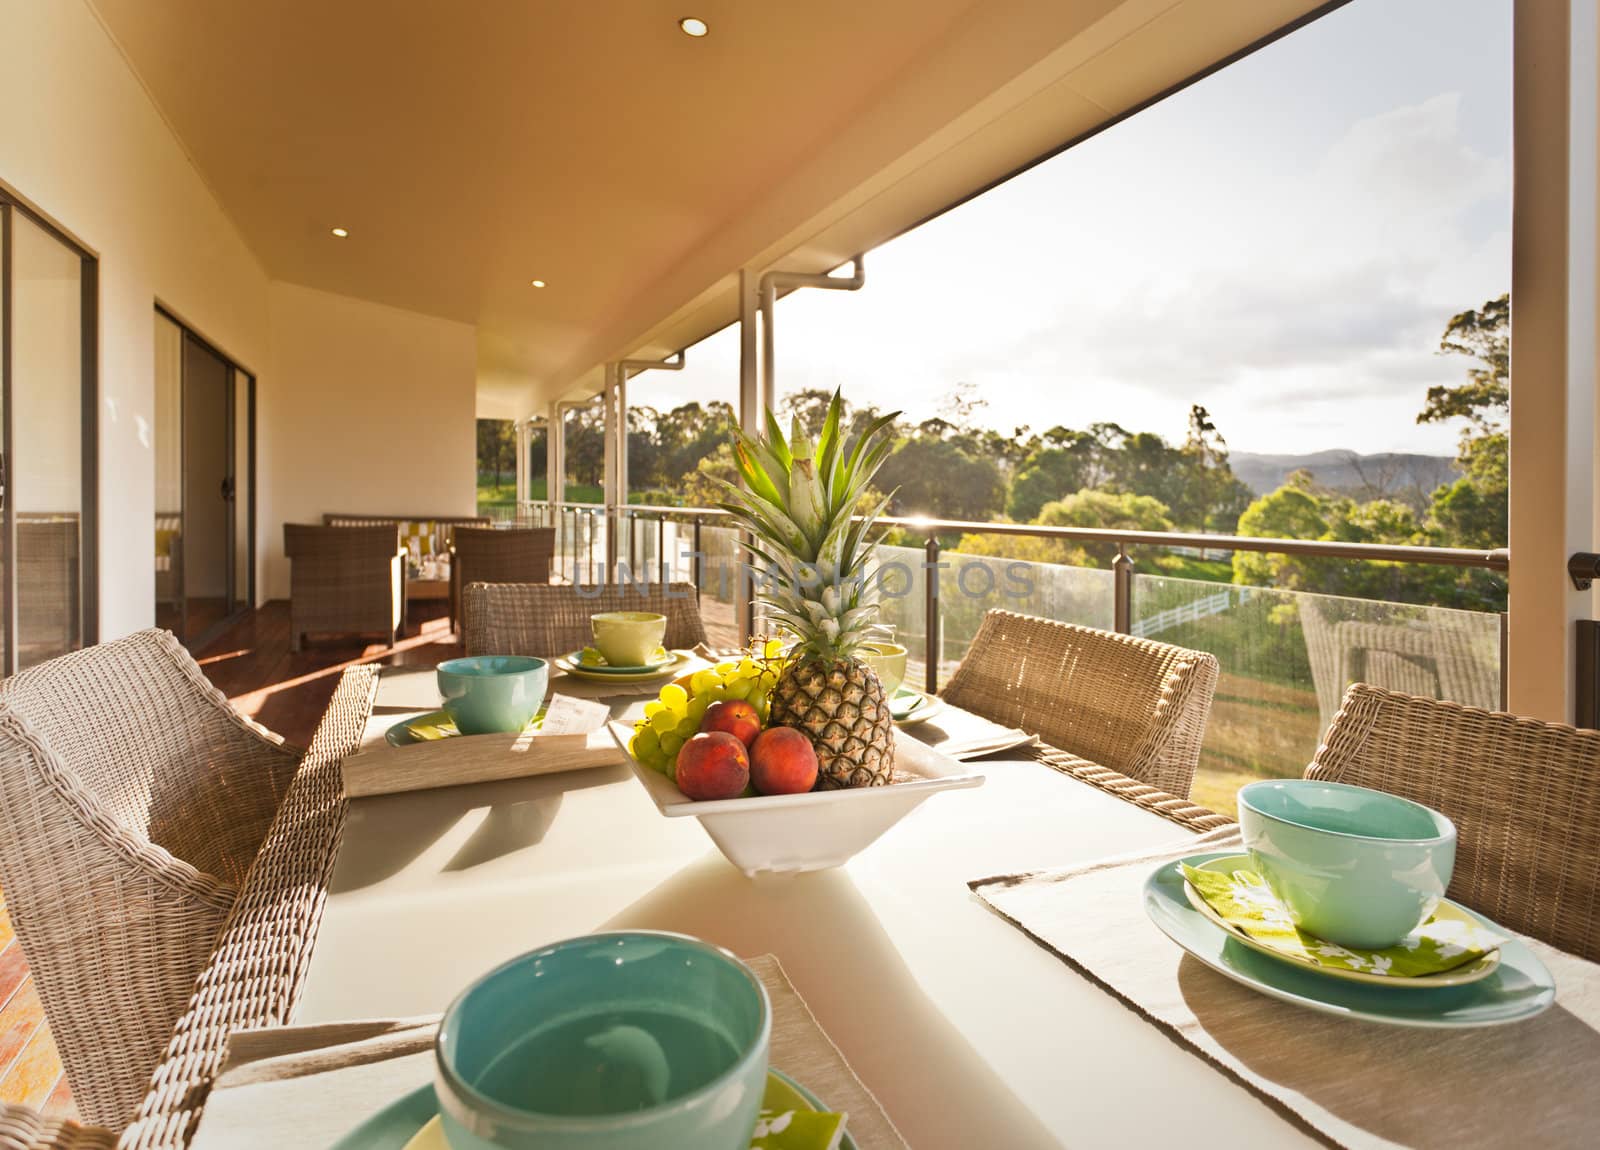 Elegant outdoor table setting with a central bowl of tropical fruit on an open verandah overlooking a rural garden